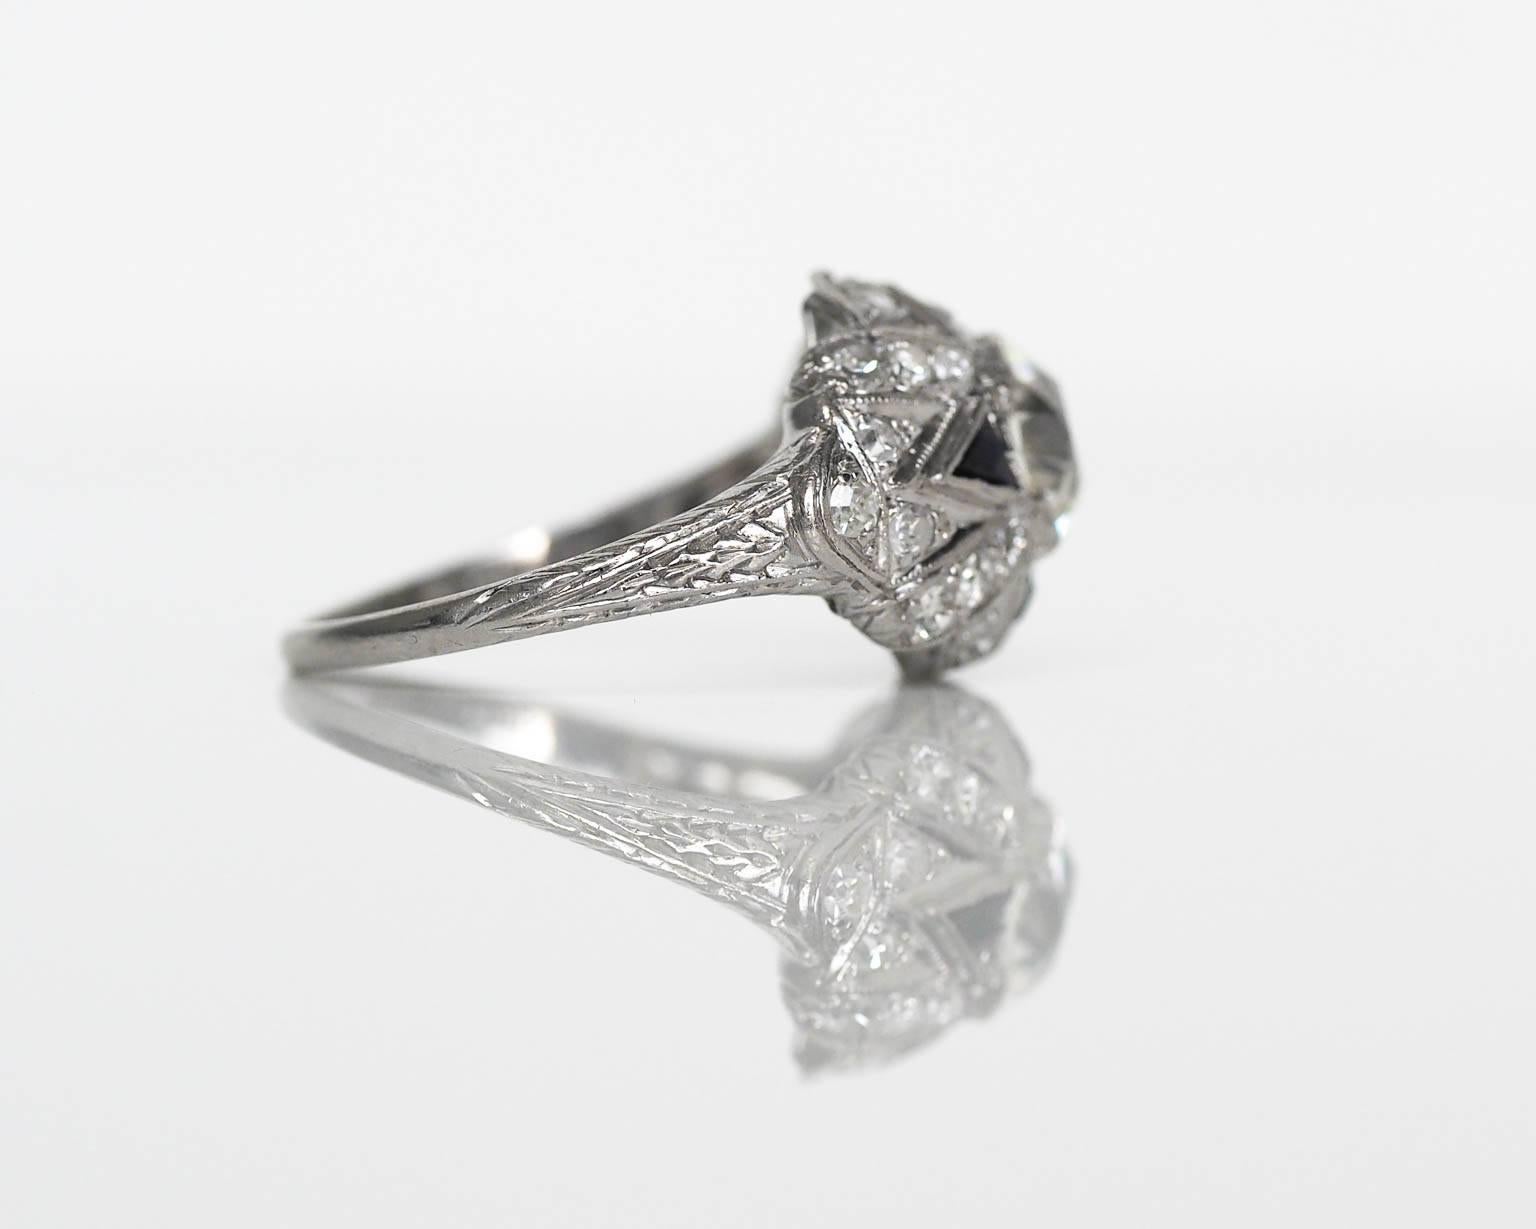 1930s Art Deco 1.28 Carat GIA Certified Old European Diamond Engagement Ring In Excellent Condition For Sale In Atlanta, GA